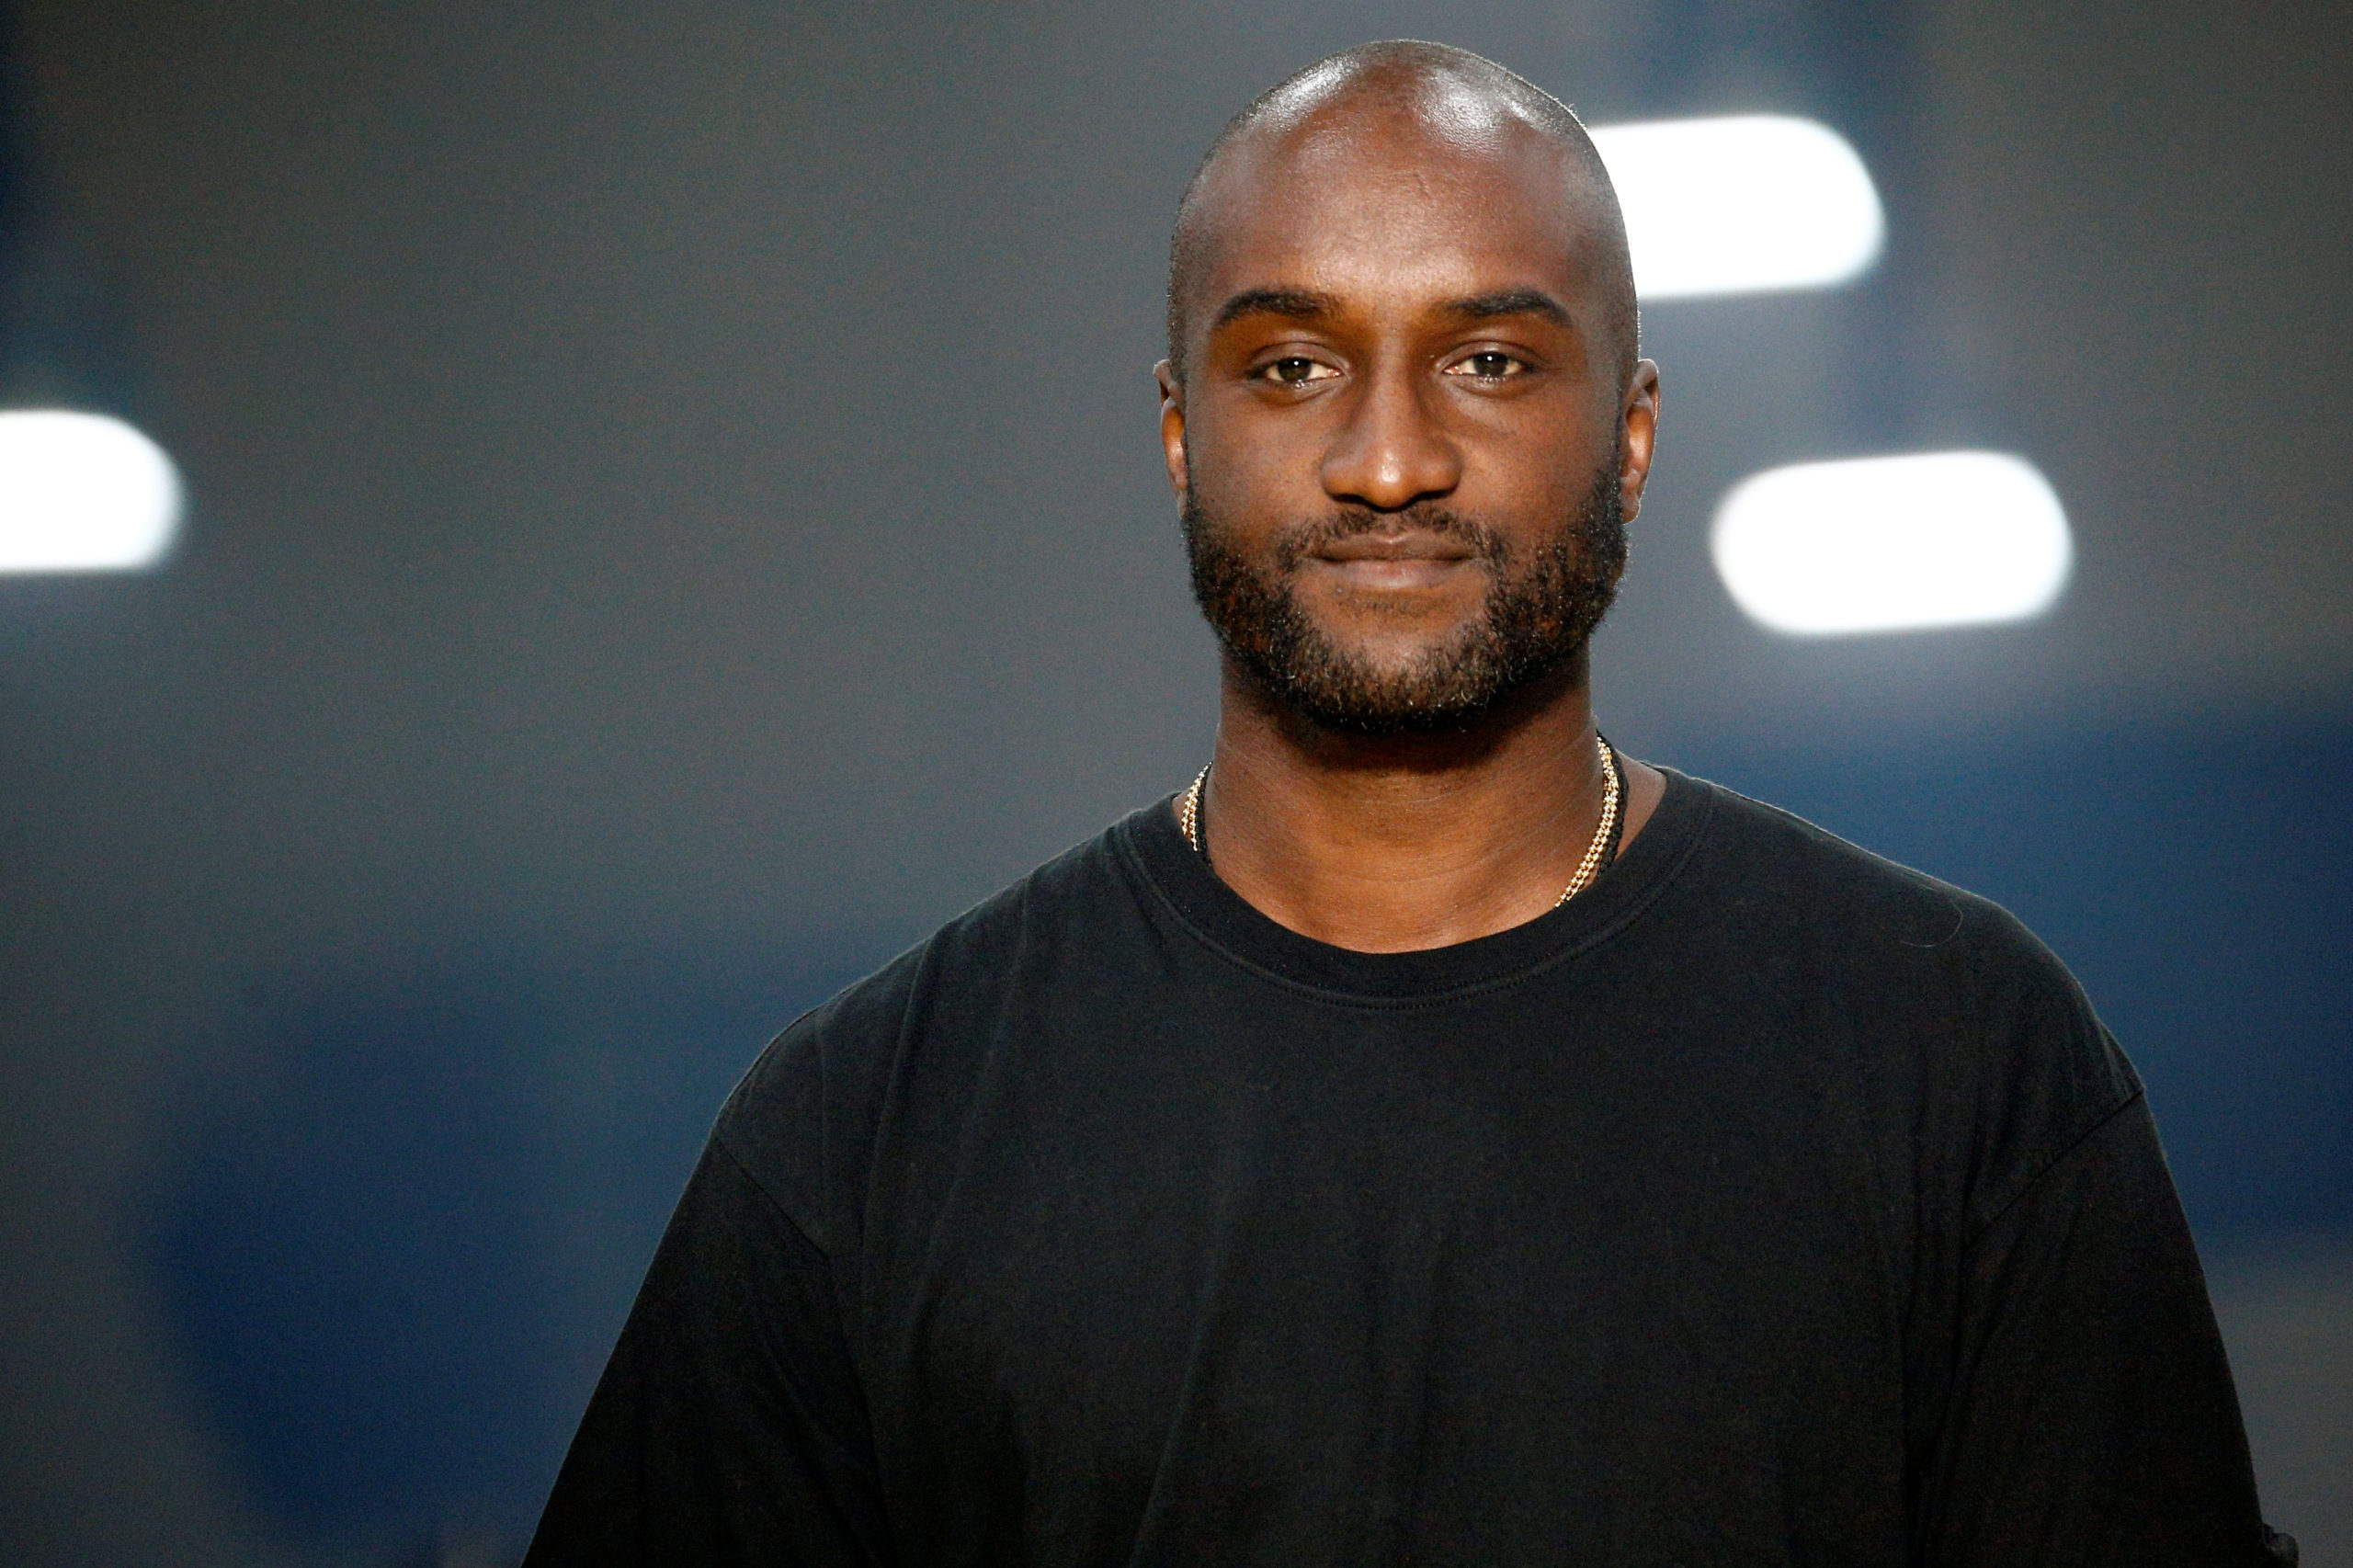 This week designers paid tribute to Off-White founder Virgil Abloh